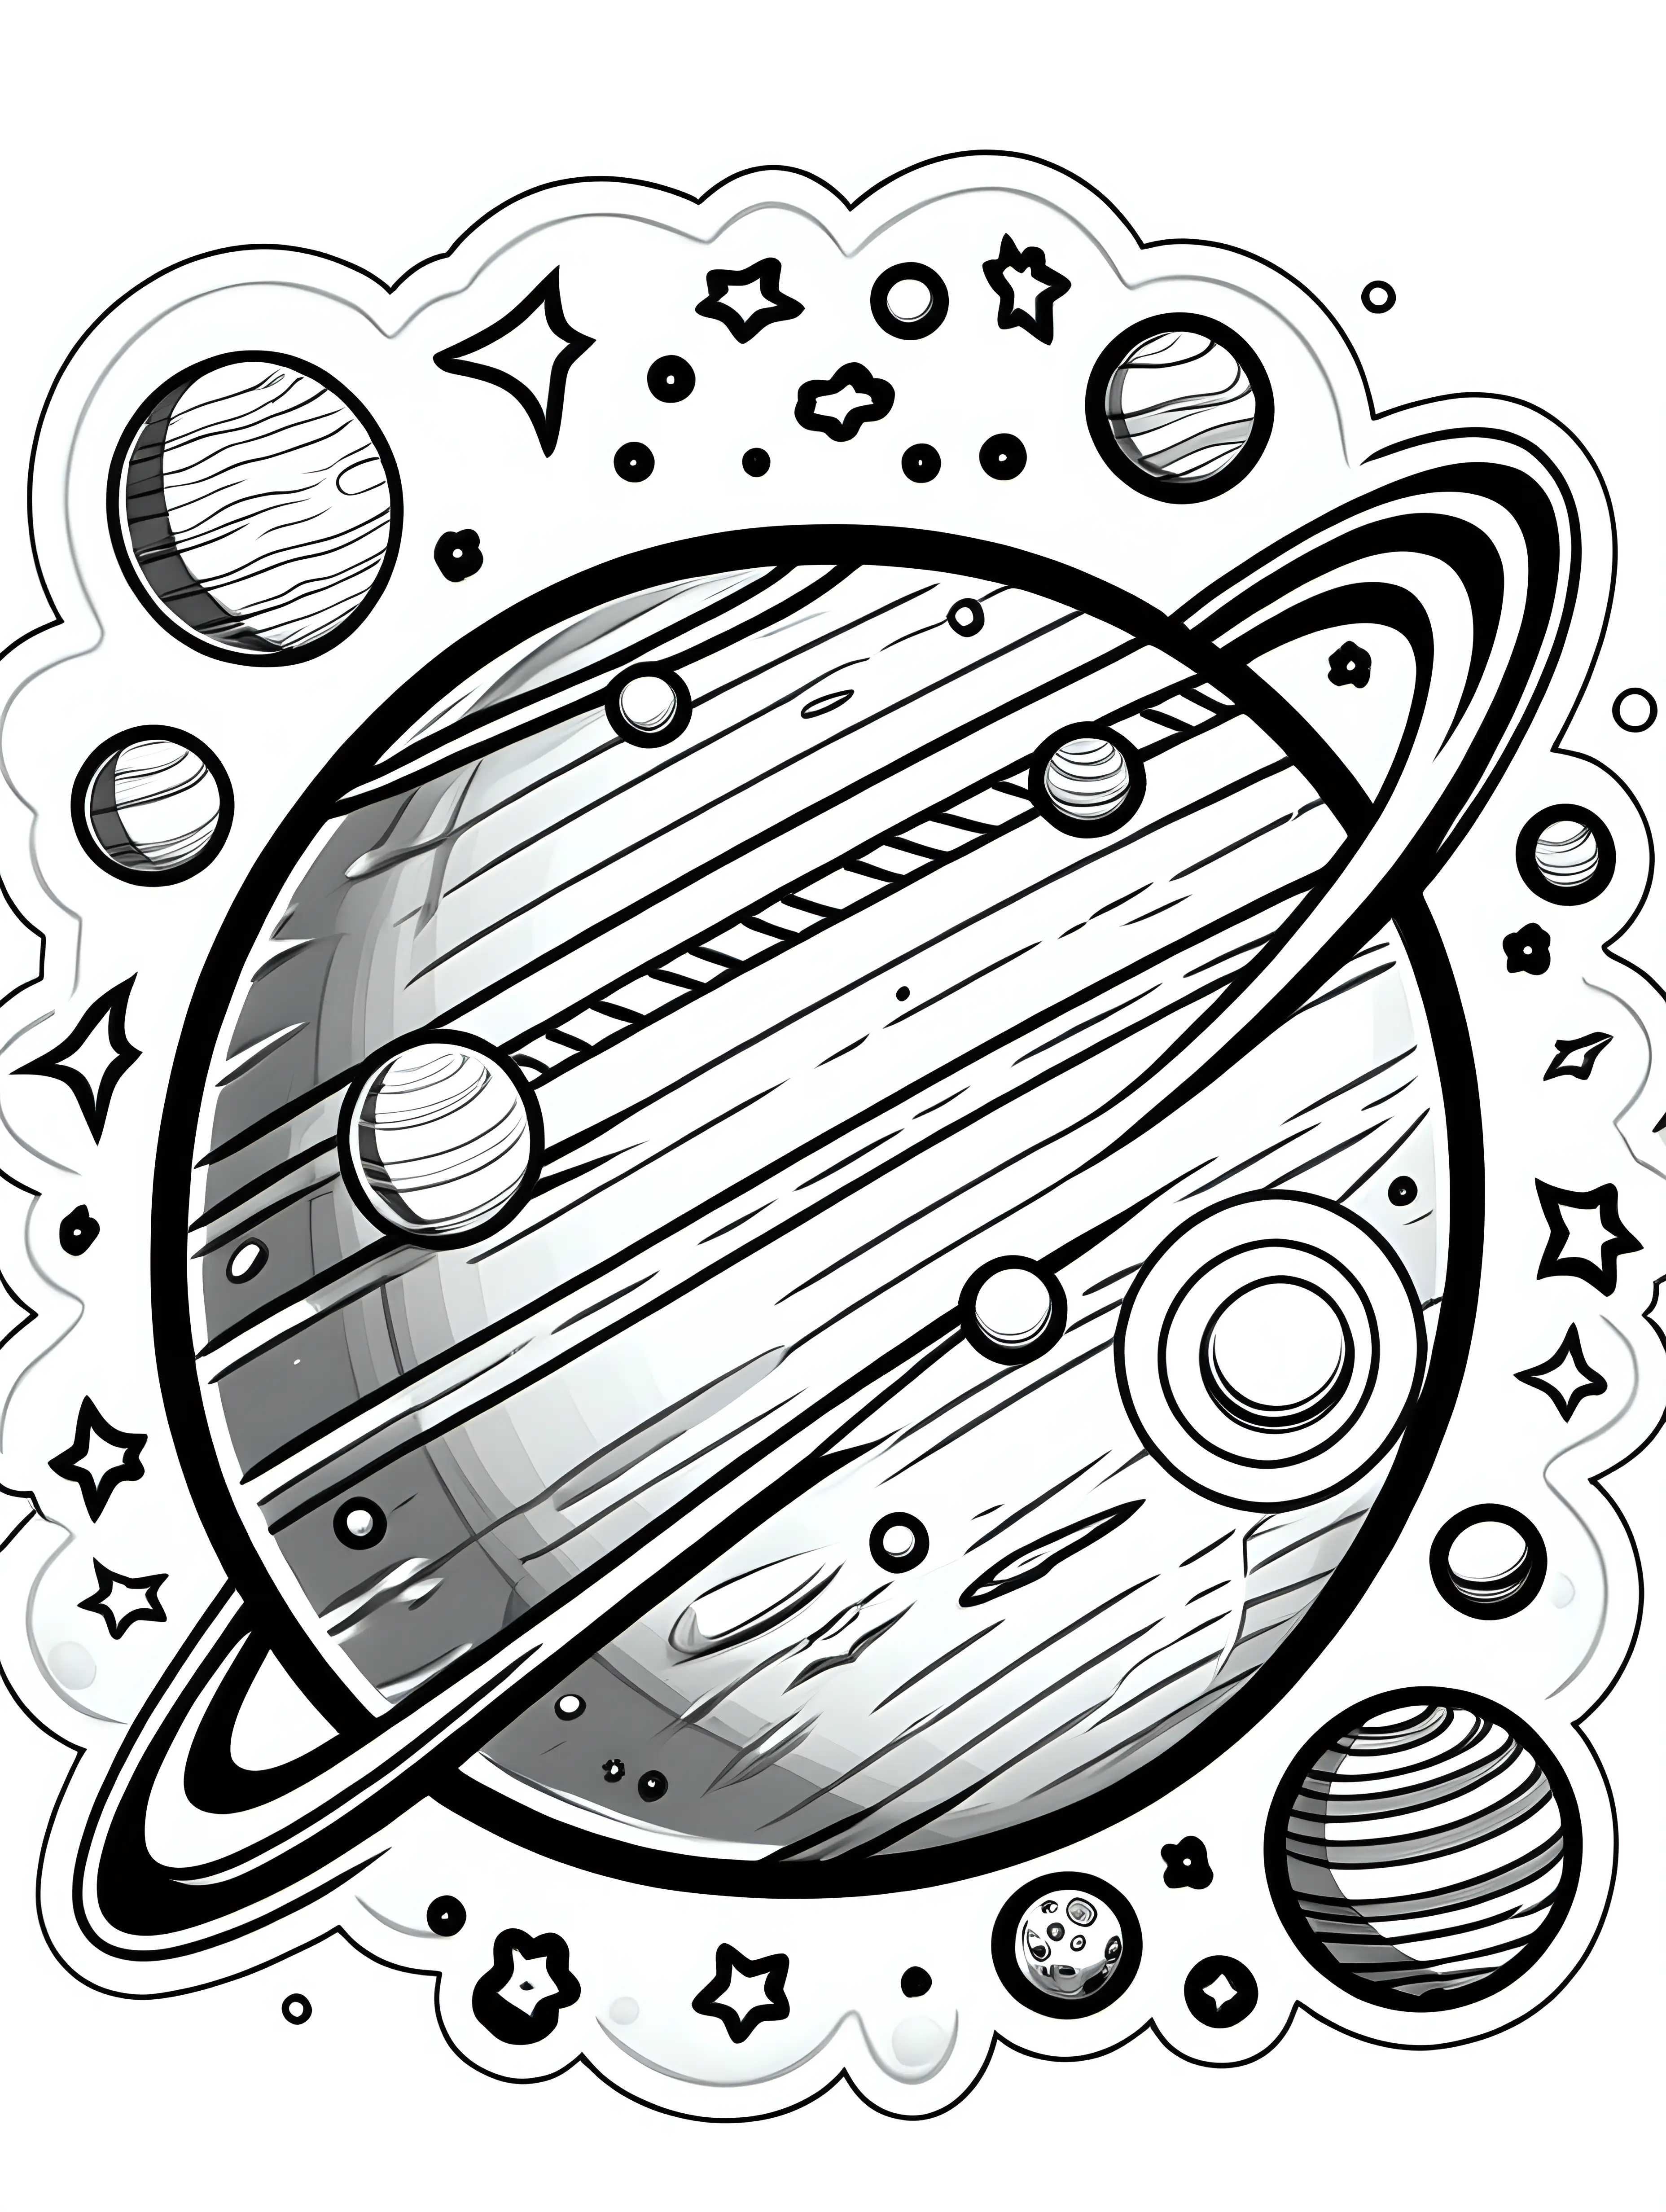 Cartoon Planet Sticker in Black and White Coloring Book Style